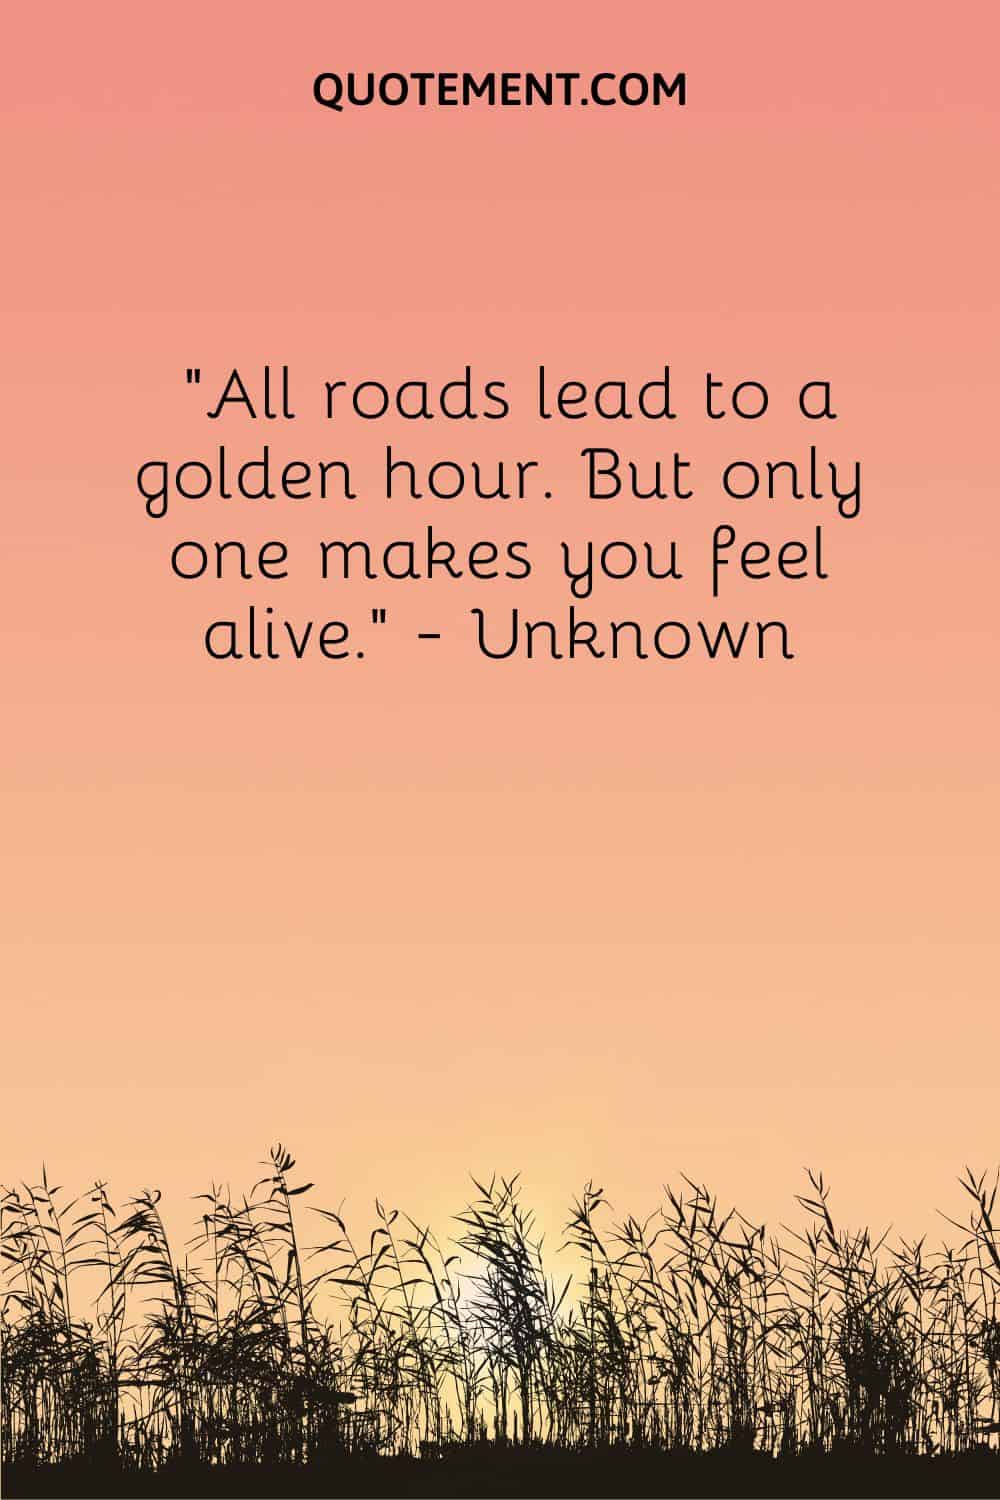 All roads lead to a golden hour. But only one makes you feel alive